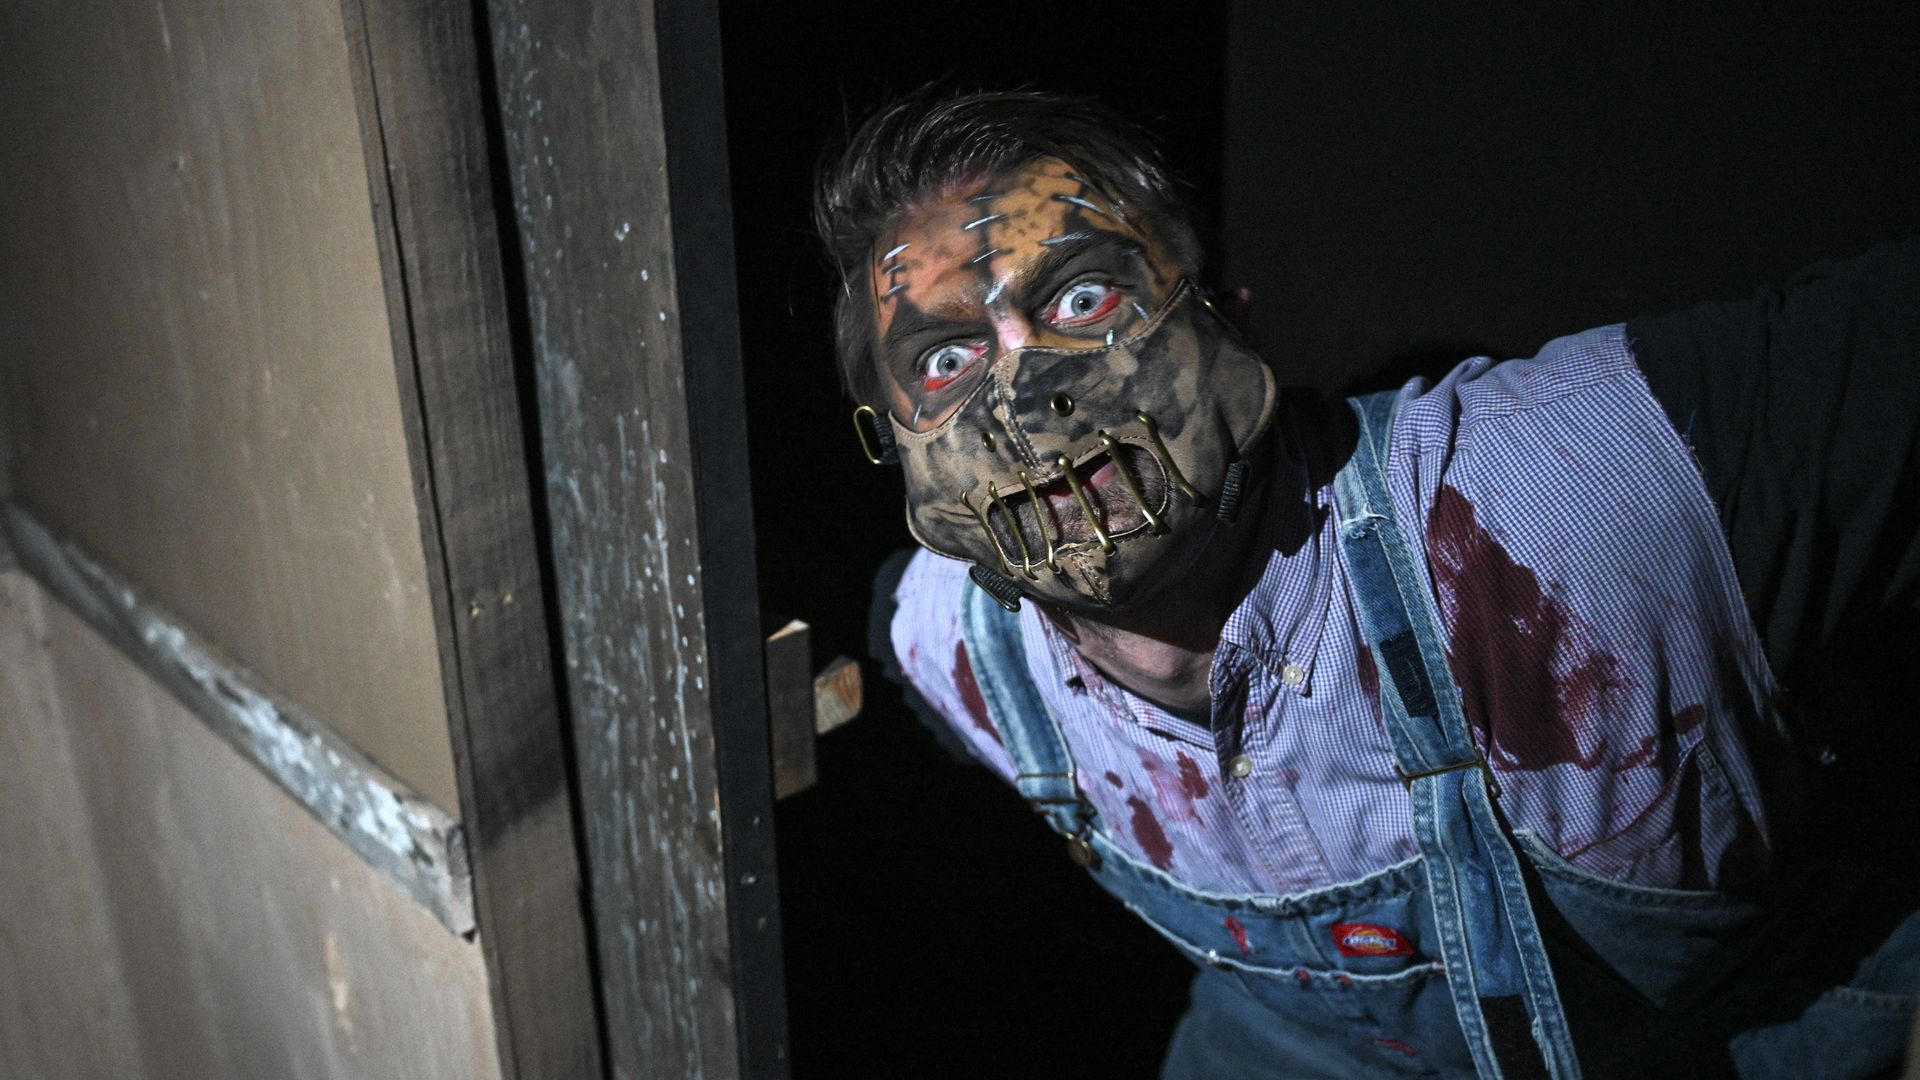 An actor in a mask covered in blood pops out at Field of Screams